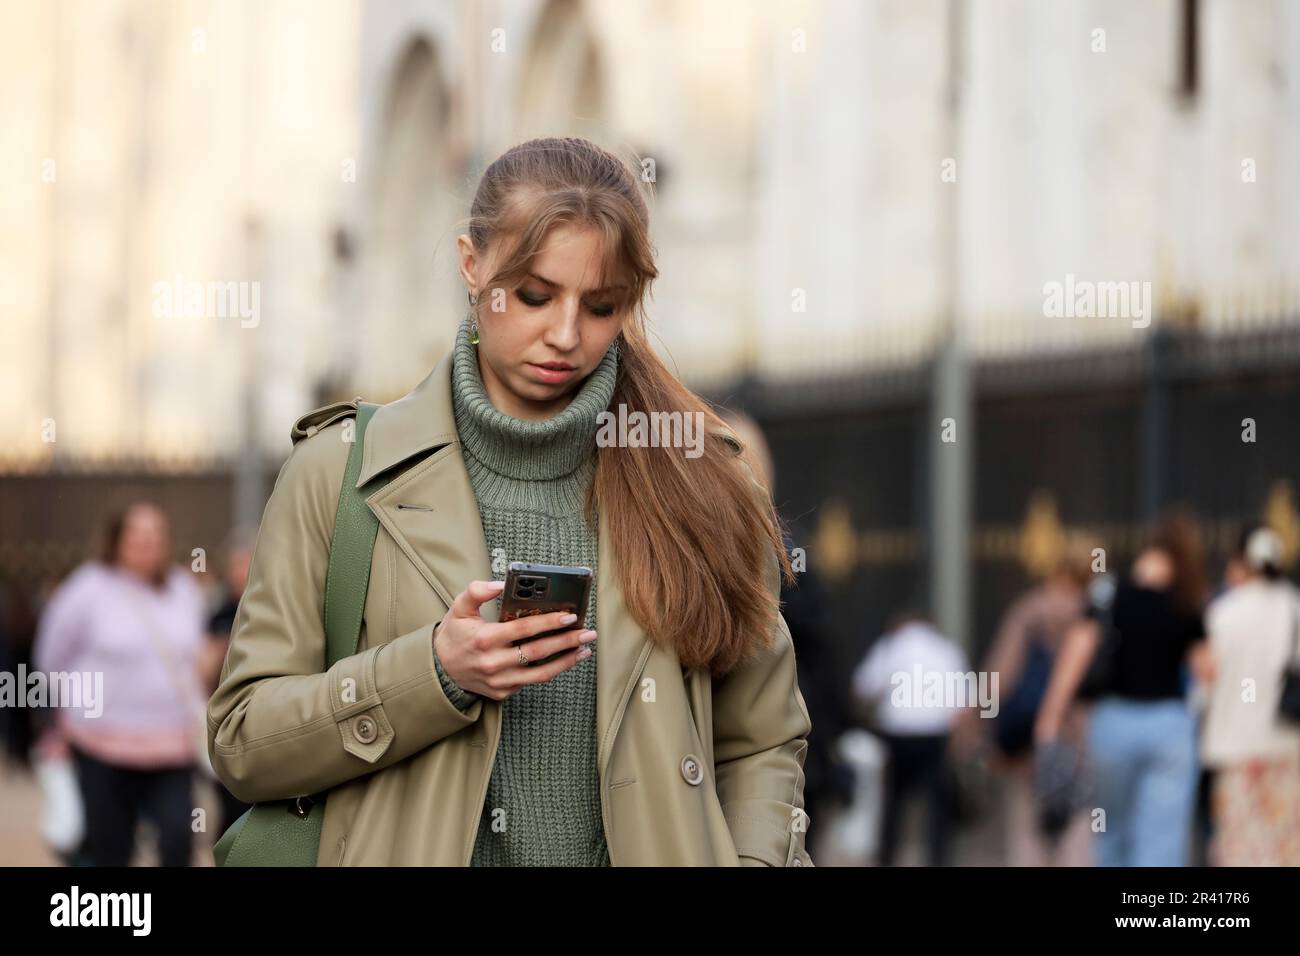 Girl walking with smartphone on a street on people background. Using mobile phone in city Stock Photo